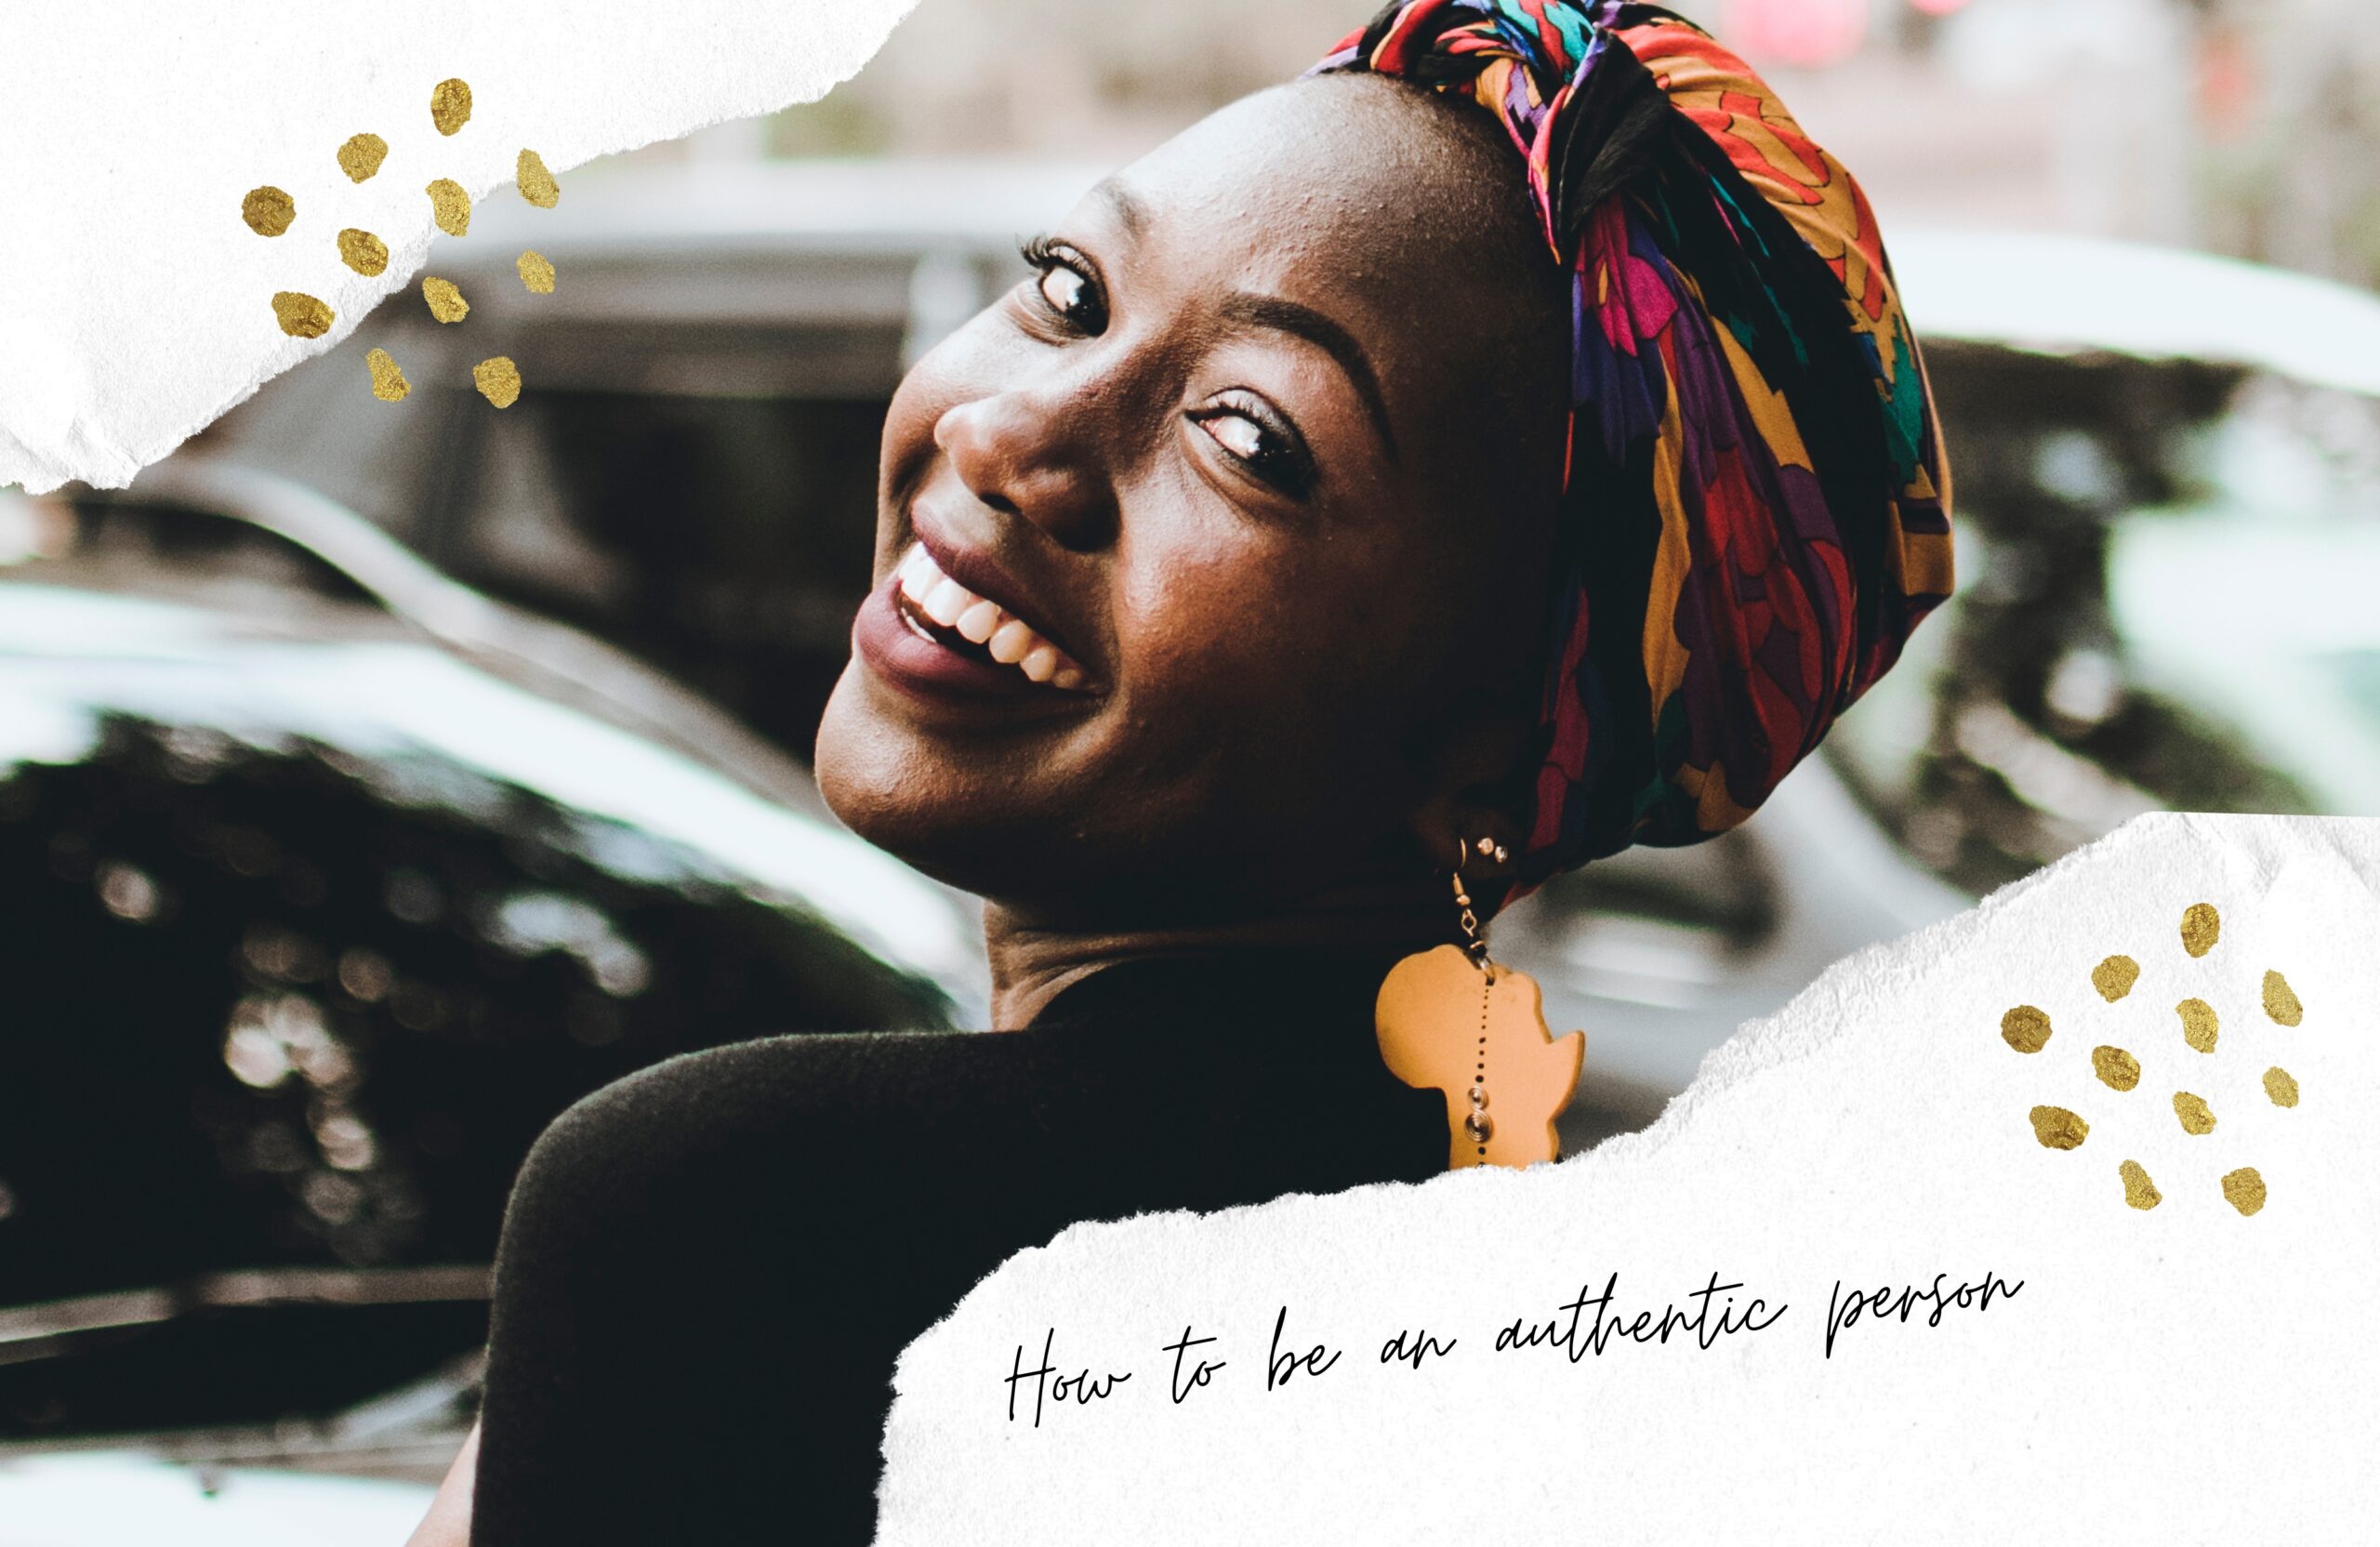 How To Be An Authentic Person